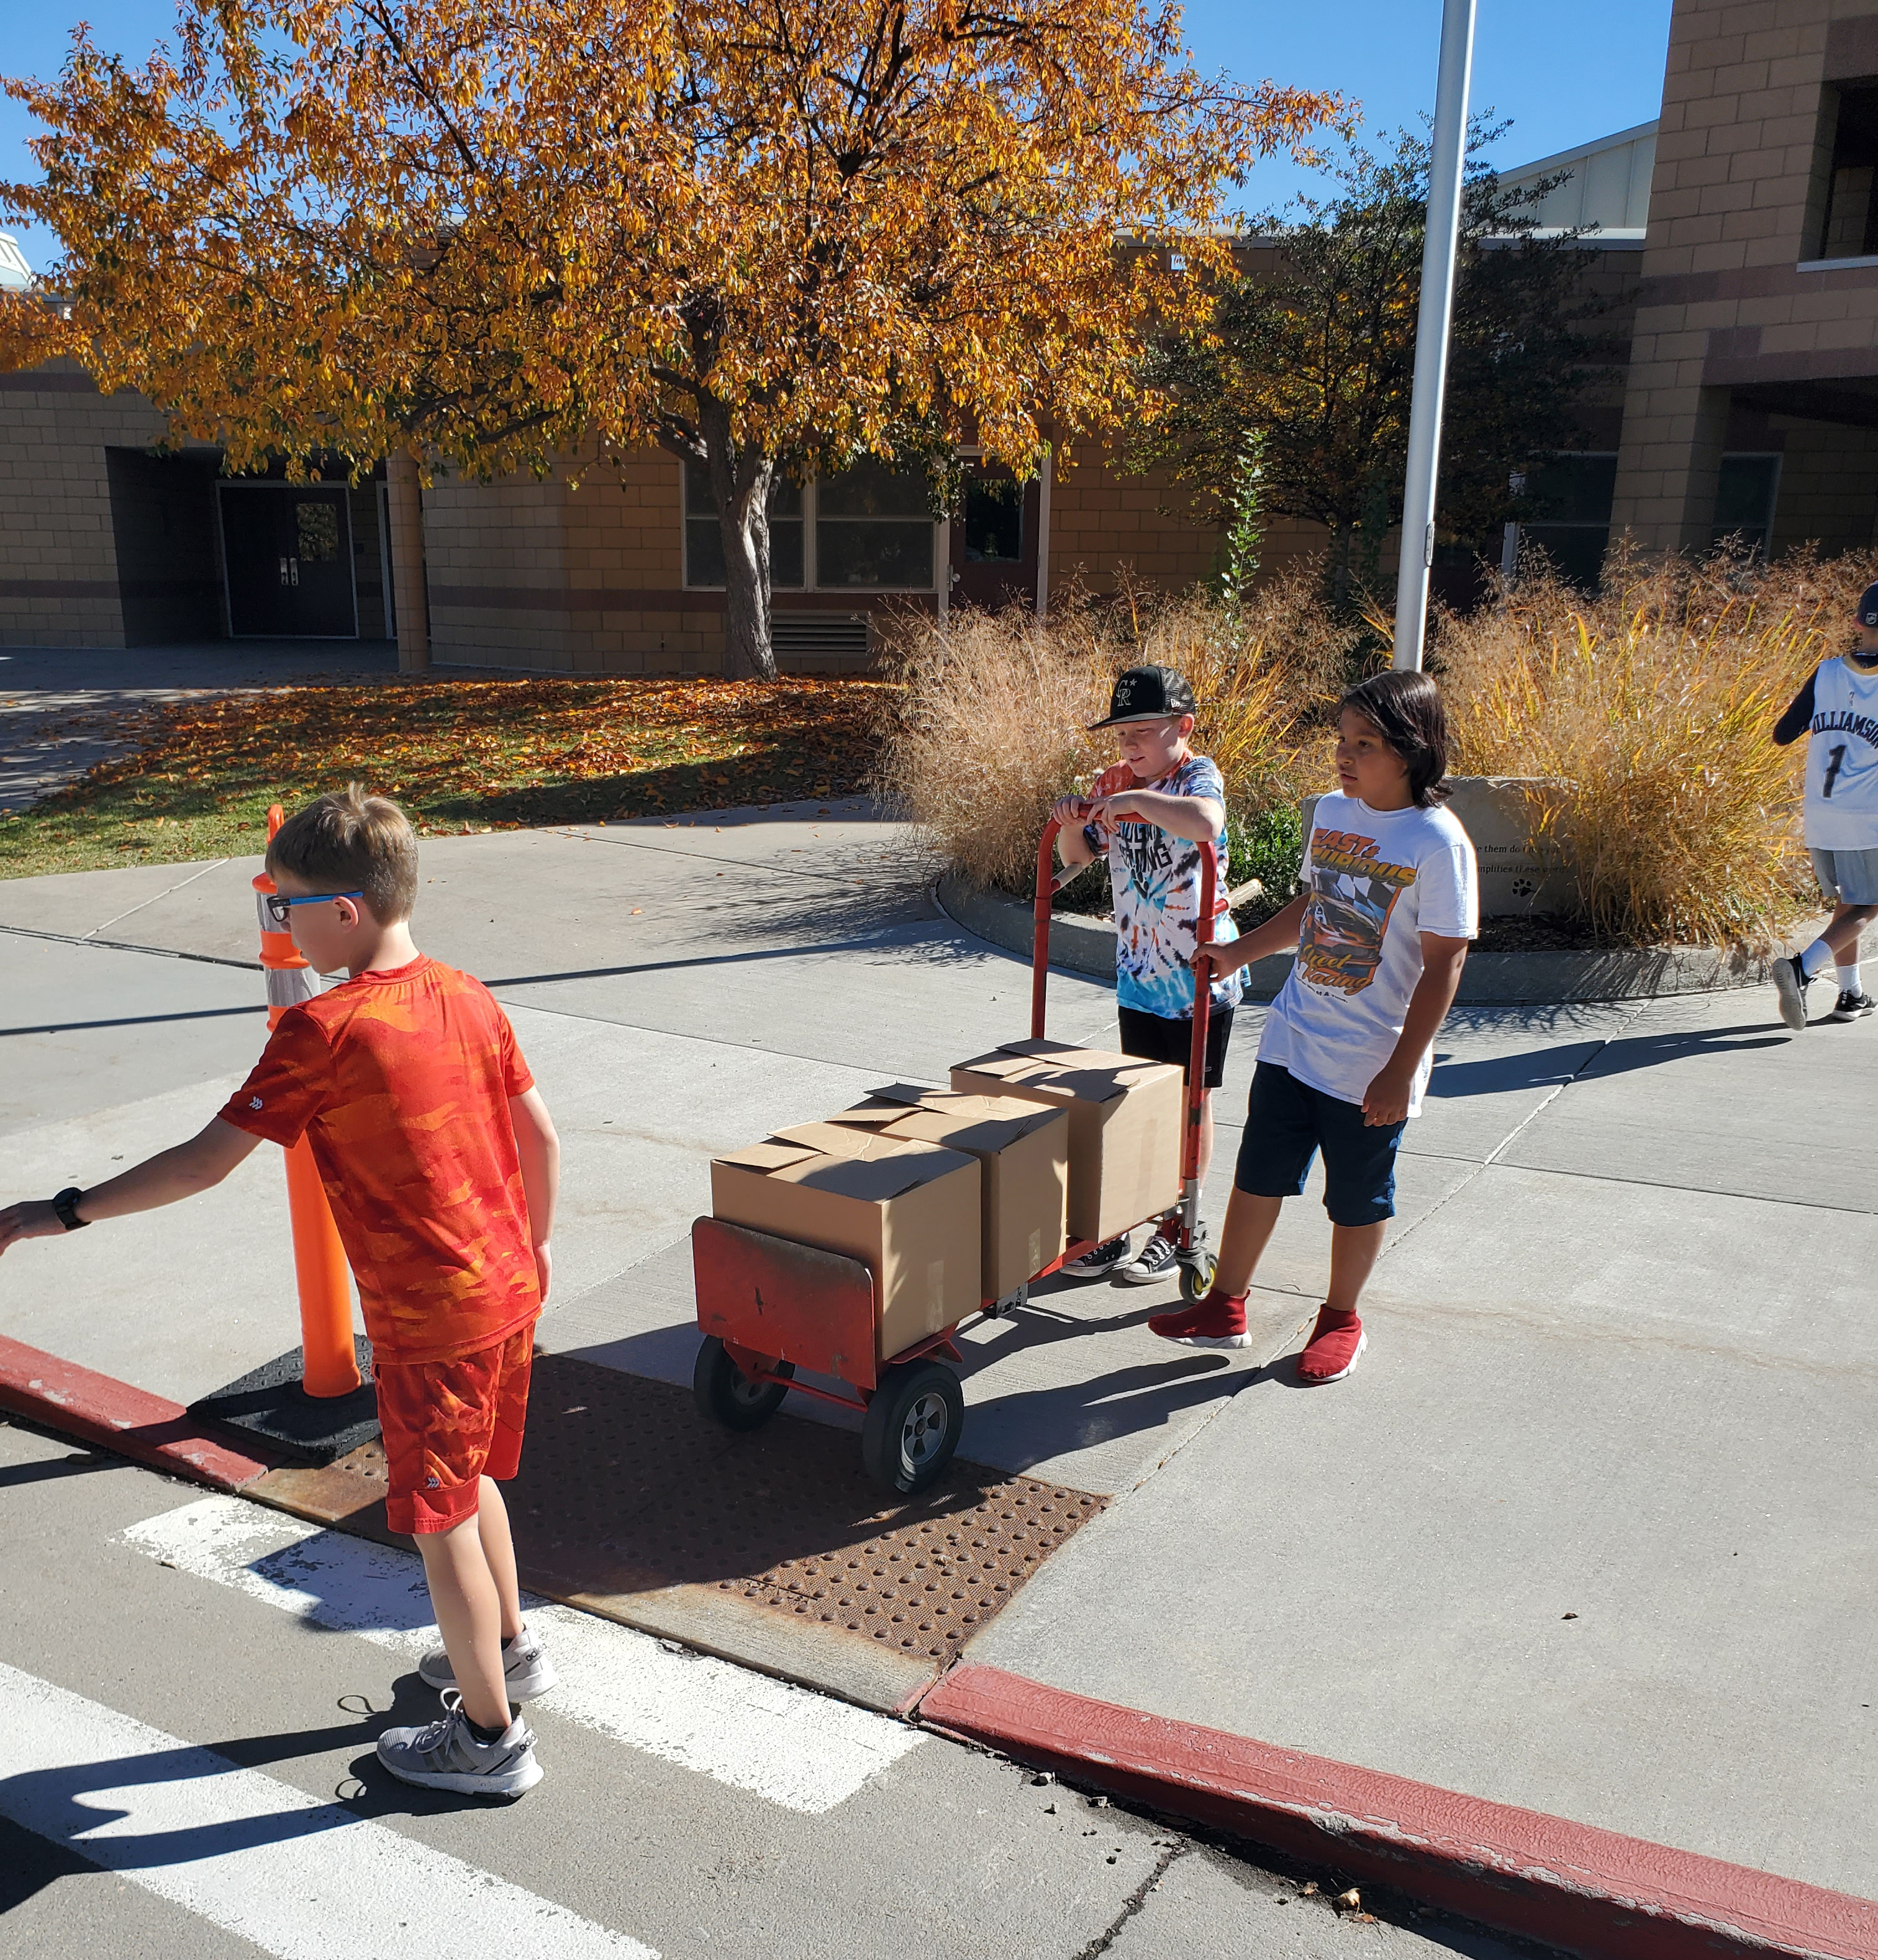 Kruse Elementary School students load up donated goods in vehicles. 